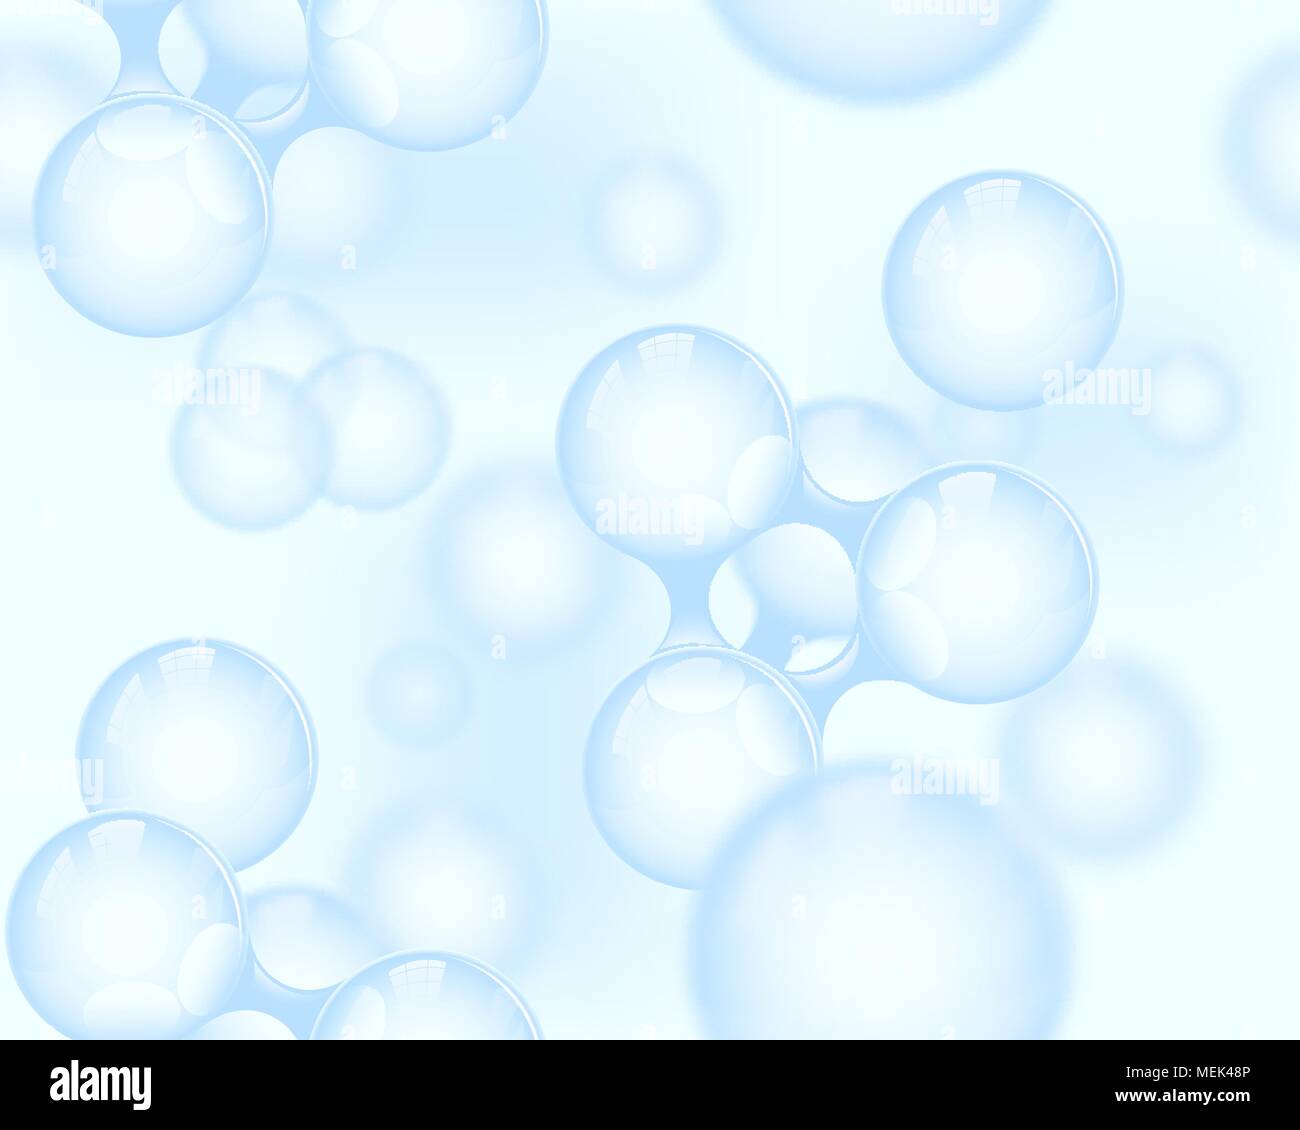 Vector abstract light blue glossy molecule seamless background. Atoms illustration. Medical texture science banner or flyer. Molecular structure Stock Vector